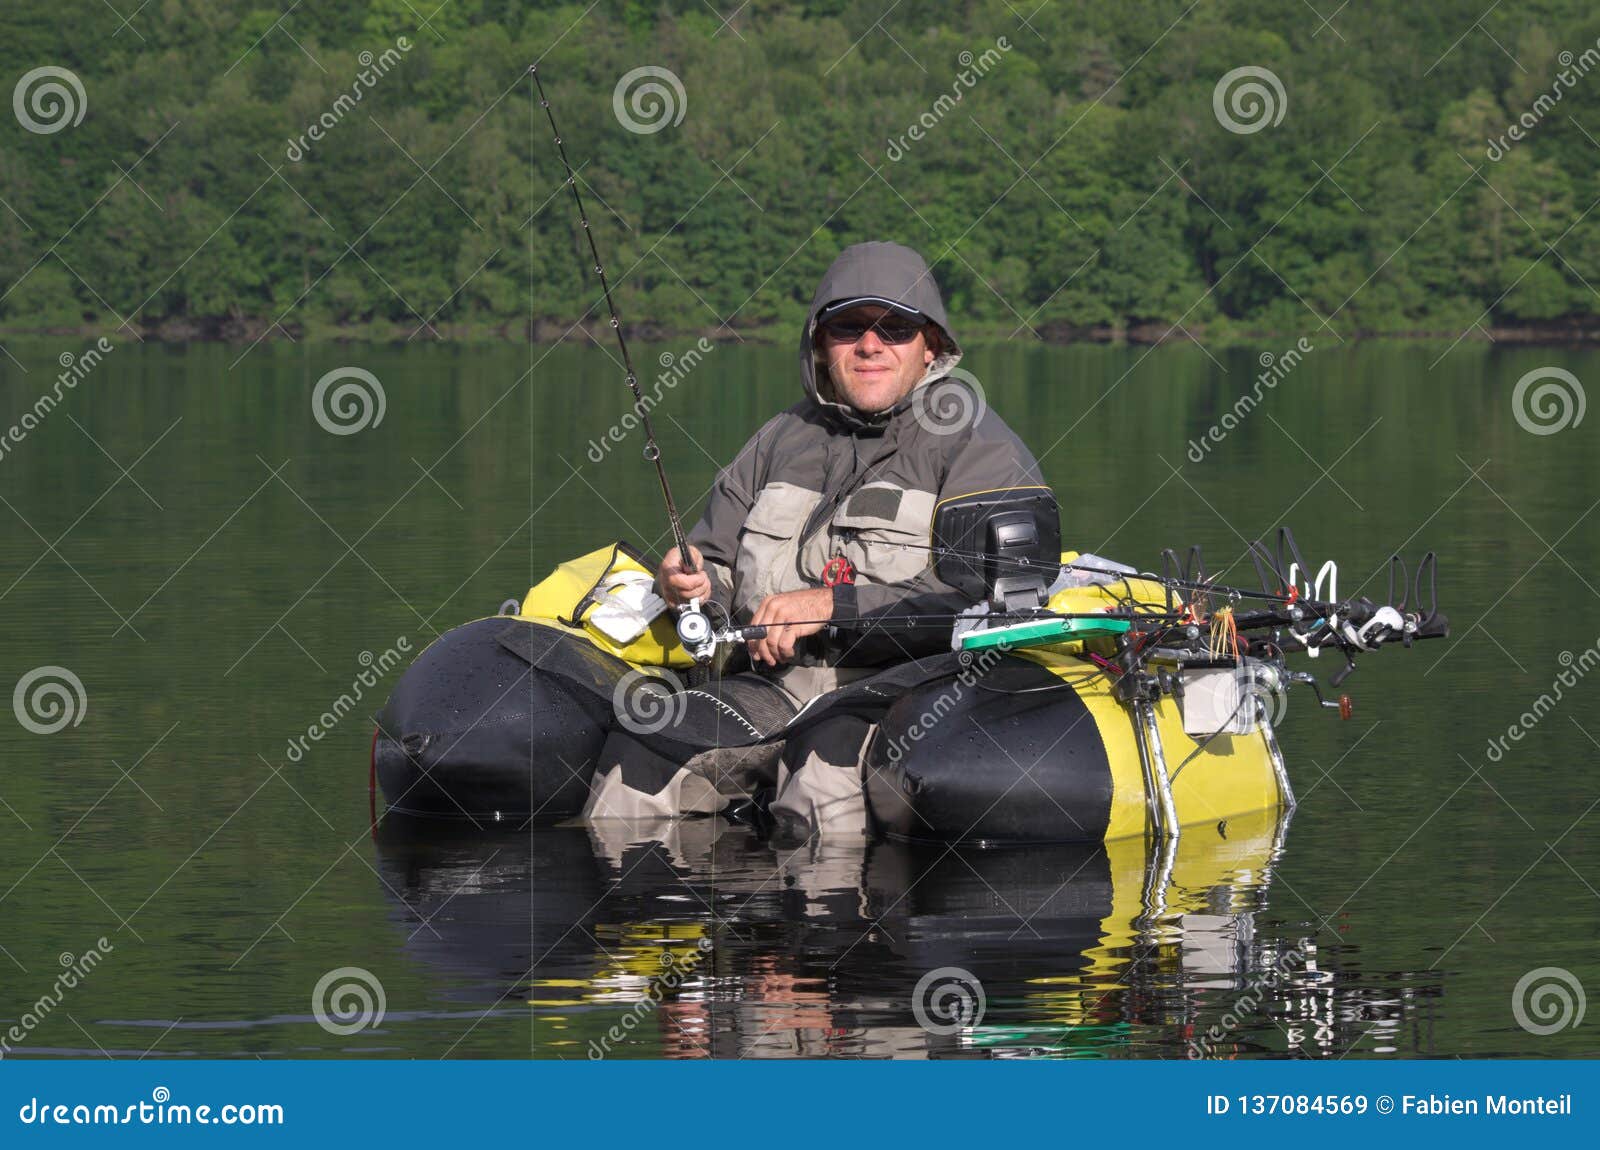 Fishing with a float tube stock image. Image of leisure - 137084569